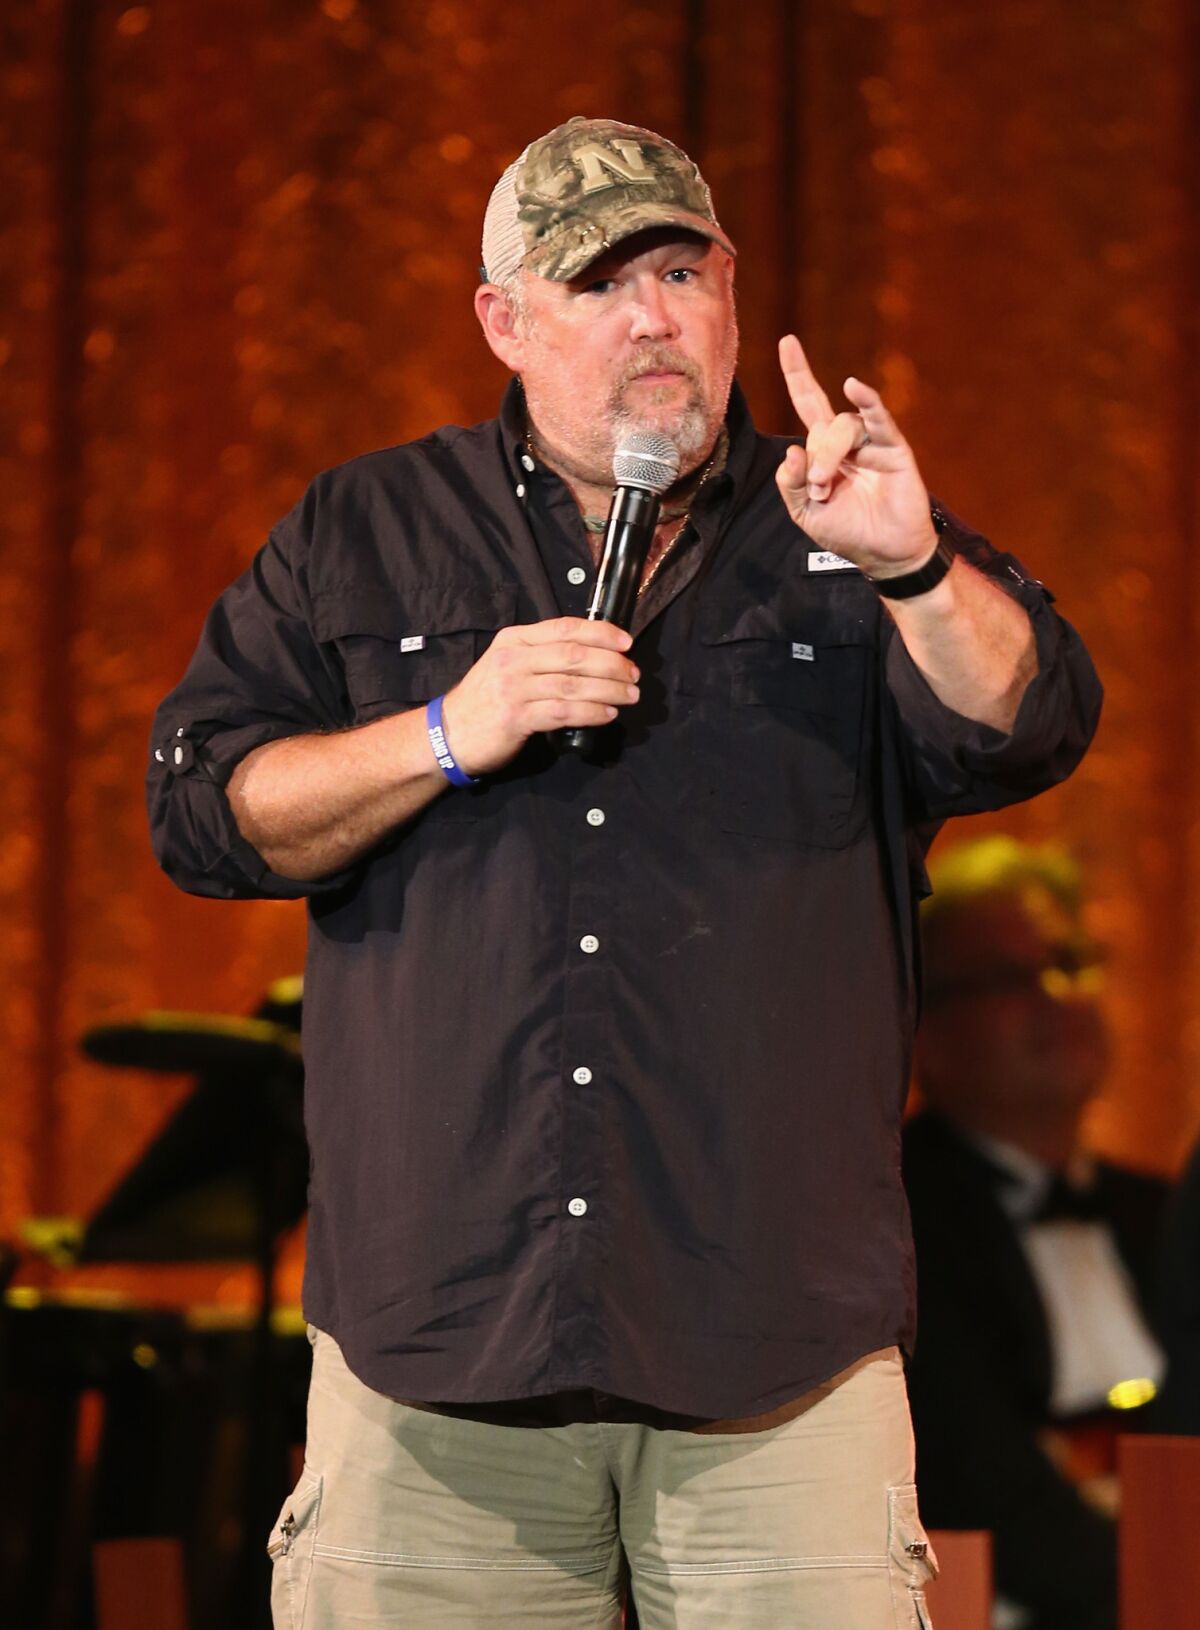 Comedian Larry the Cable Guy speaks onstage during The Walt Disney Family Museum's 2nd Annual Gala at Disney's Grand Californian Hotel & Spa at The Disneyland Resort on November 1, 2016 in Anaheim, California. (Photo by Joe Scarnici/Getty Images for The Walt Disney Family Museum)